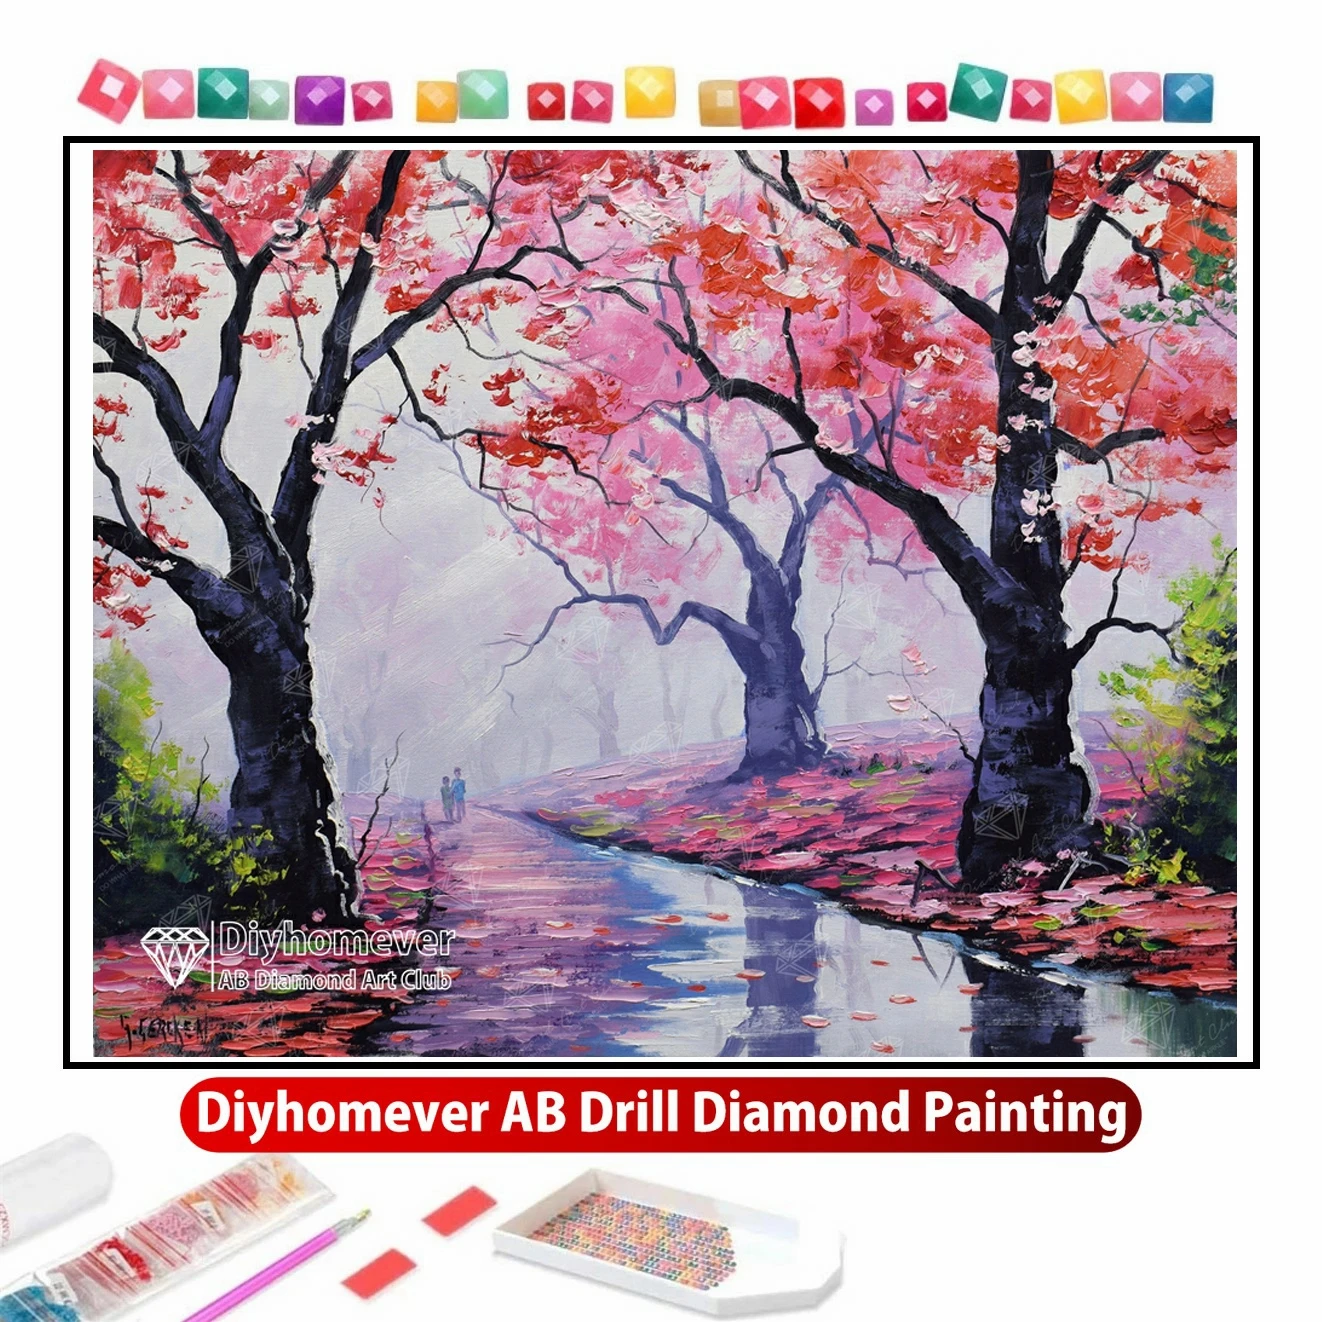 

Fallen Leaves 5D DIY AB Diamond Painting Embroidery Fantasy Forest Cross Stitch Kits Mosaic Picture Handicraft Home Decor Gift